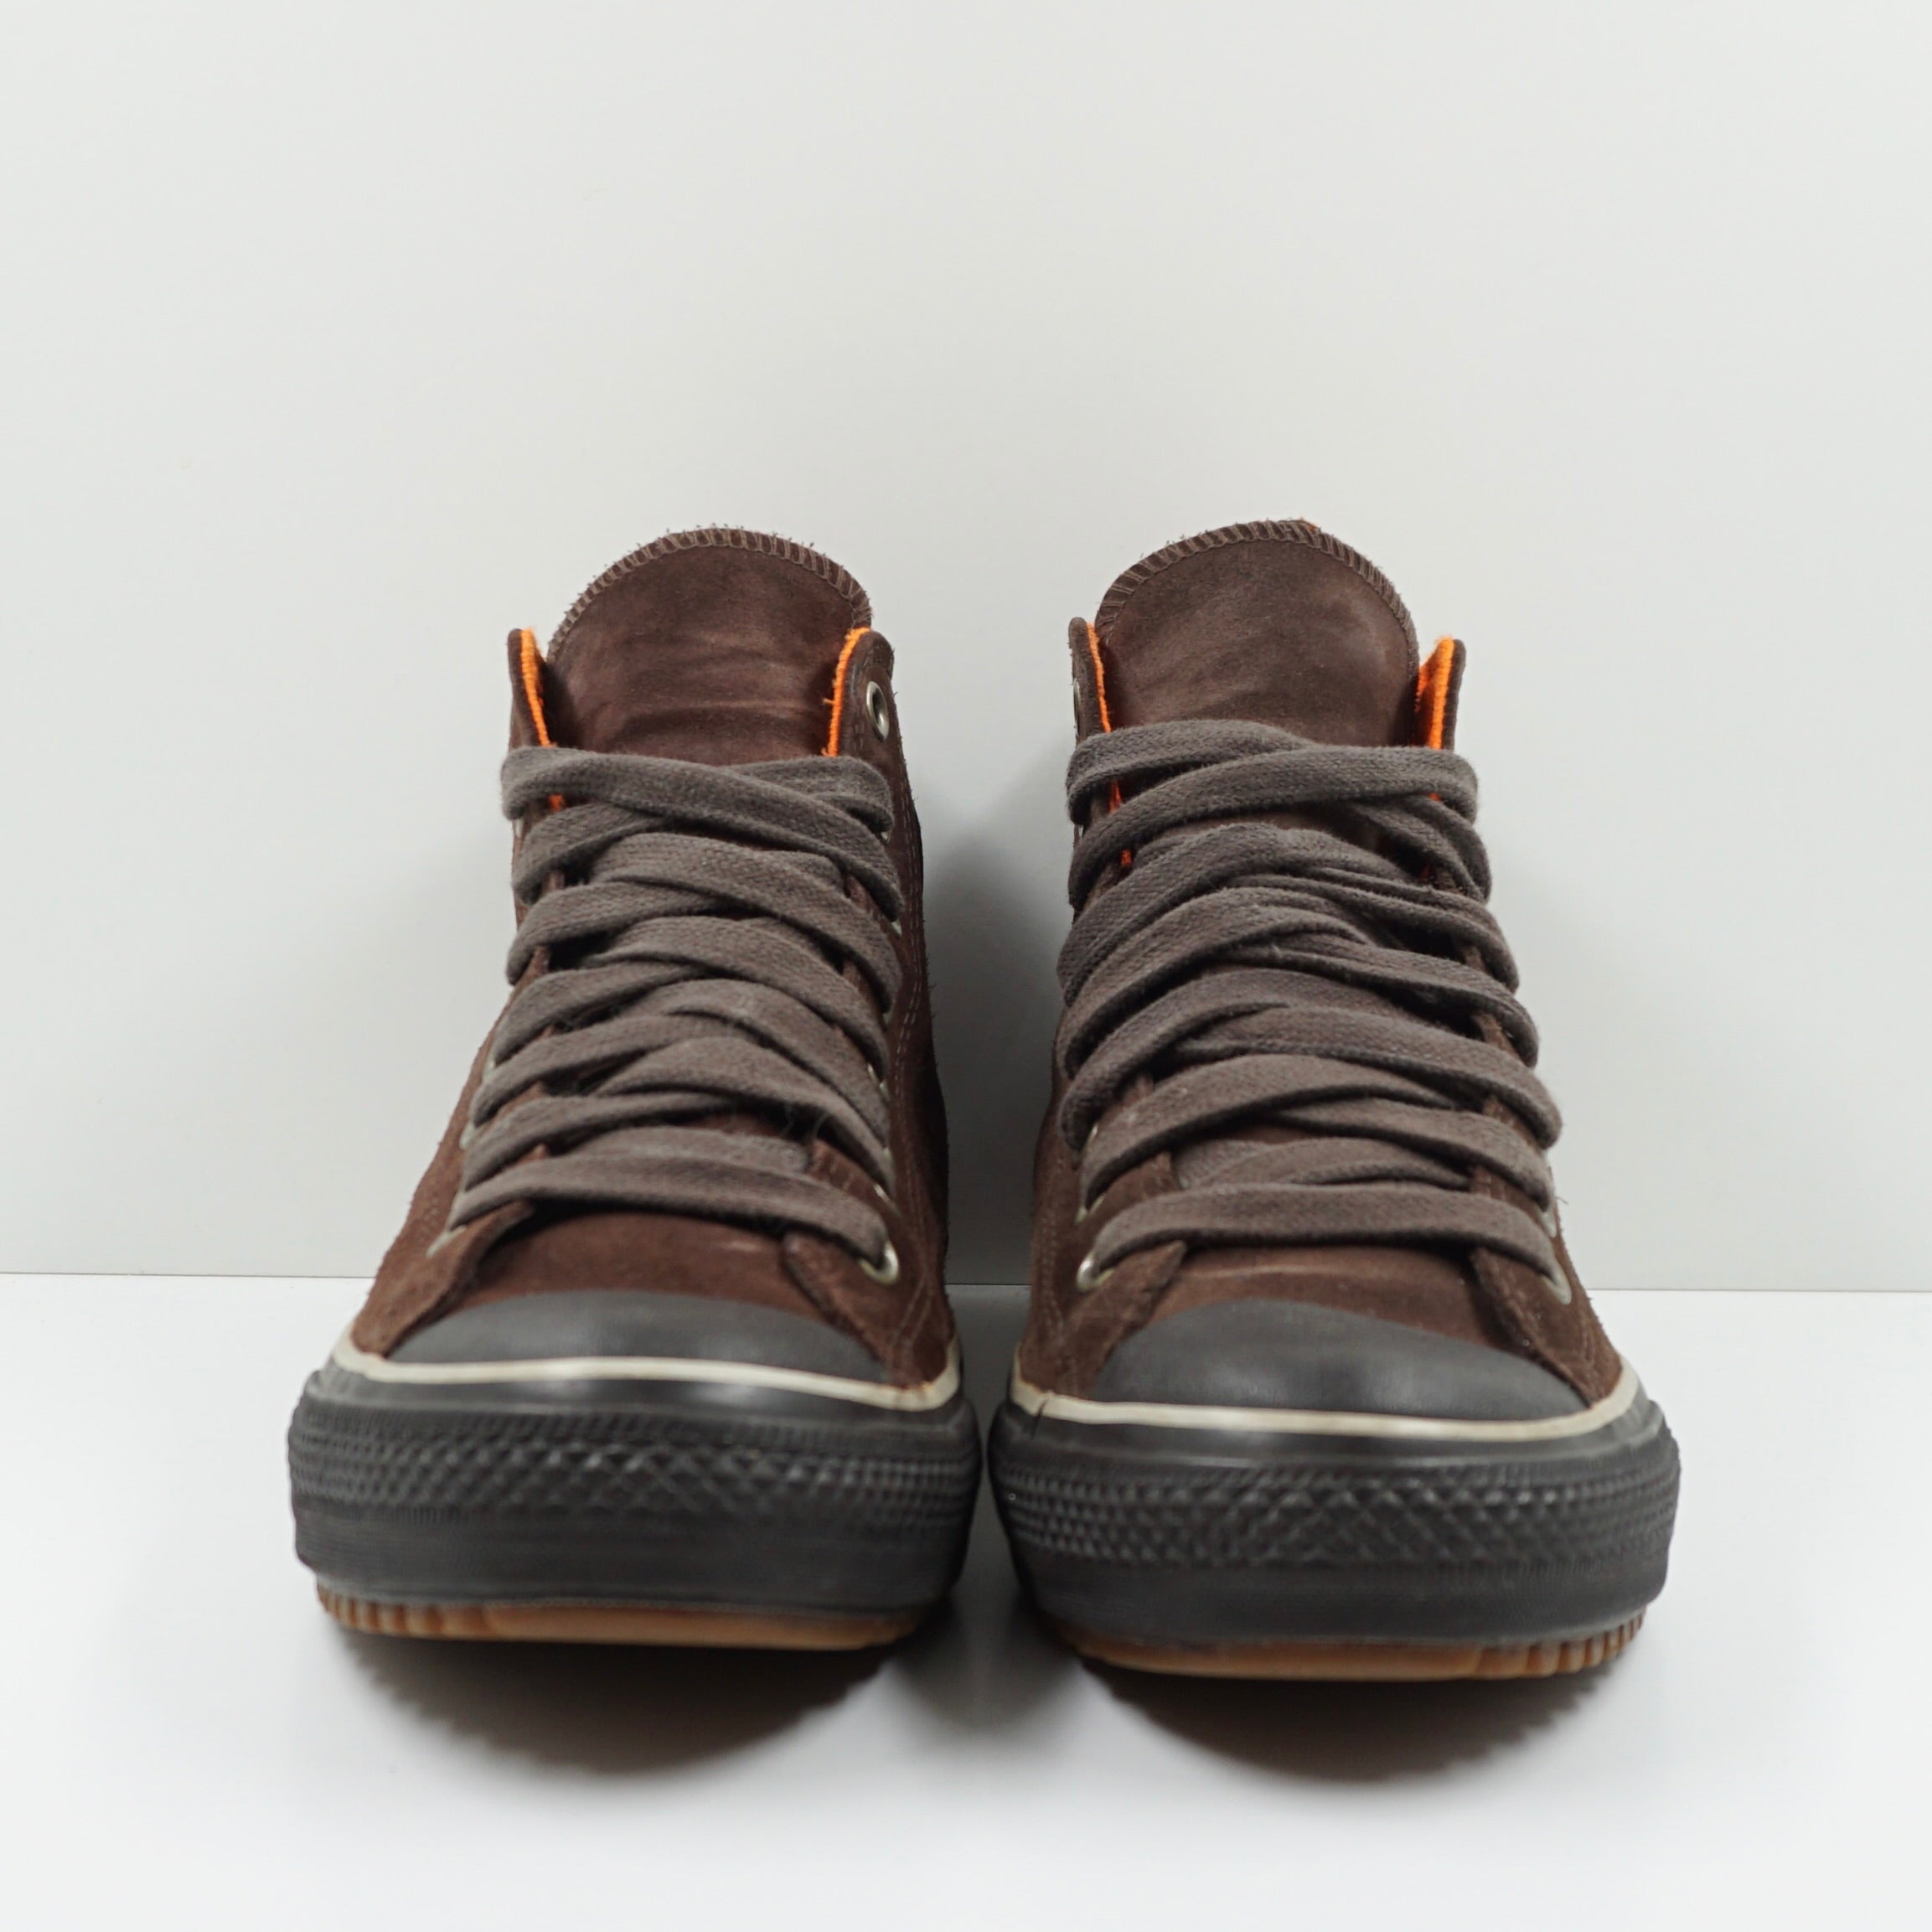 Converse Chuck Taylor All Star Winterized Mid Brown Suede